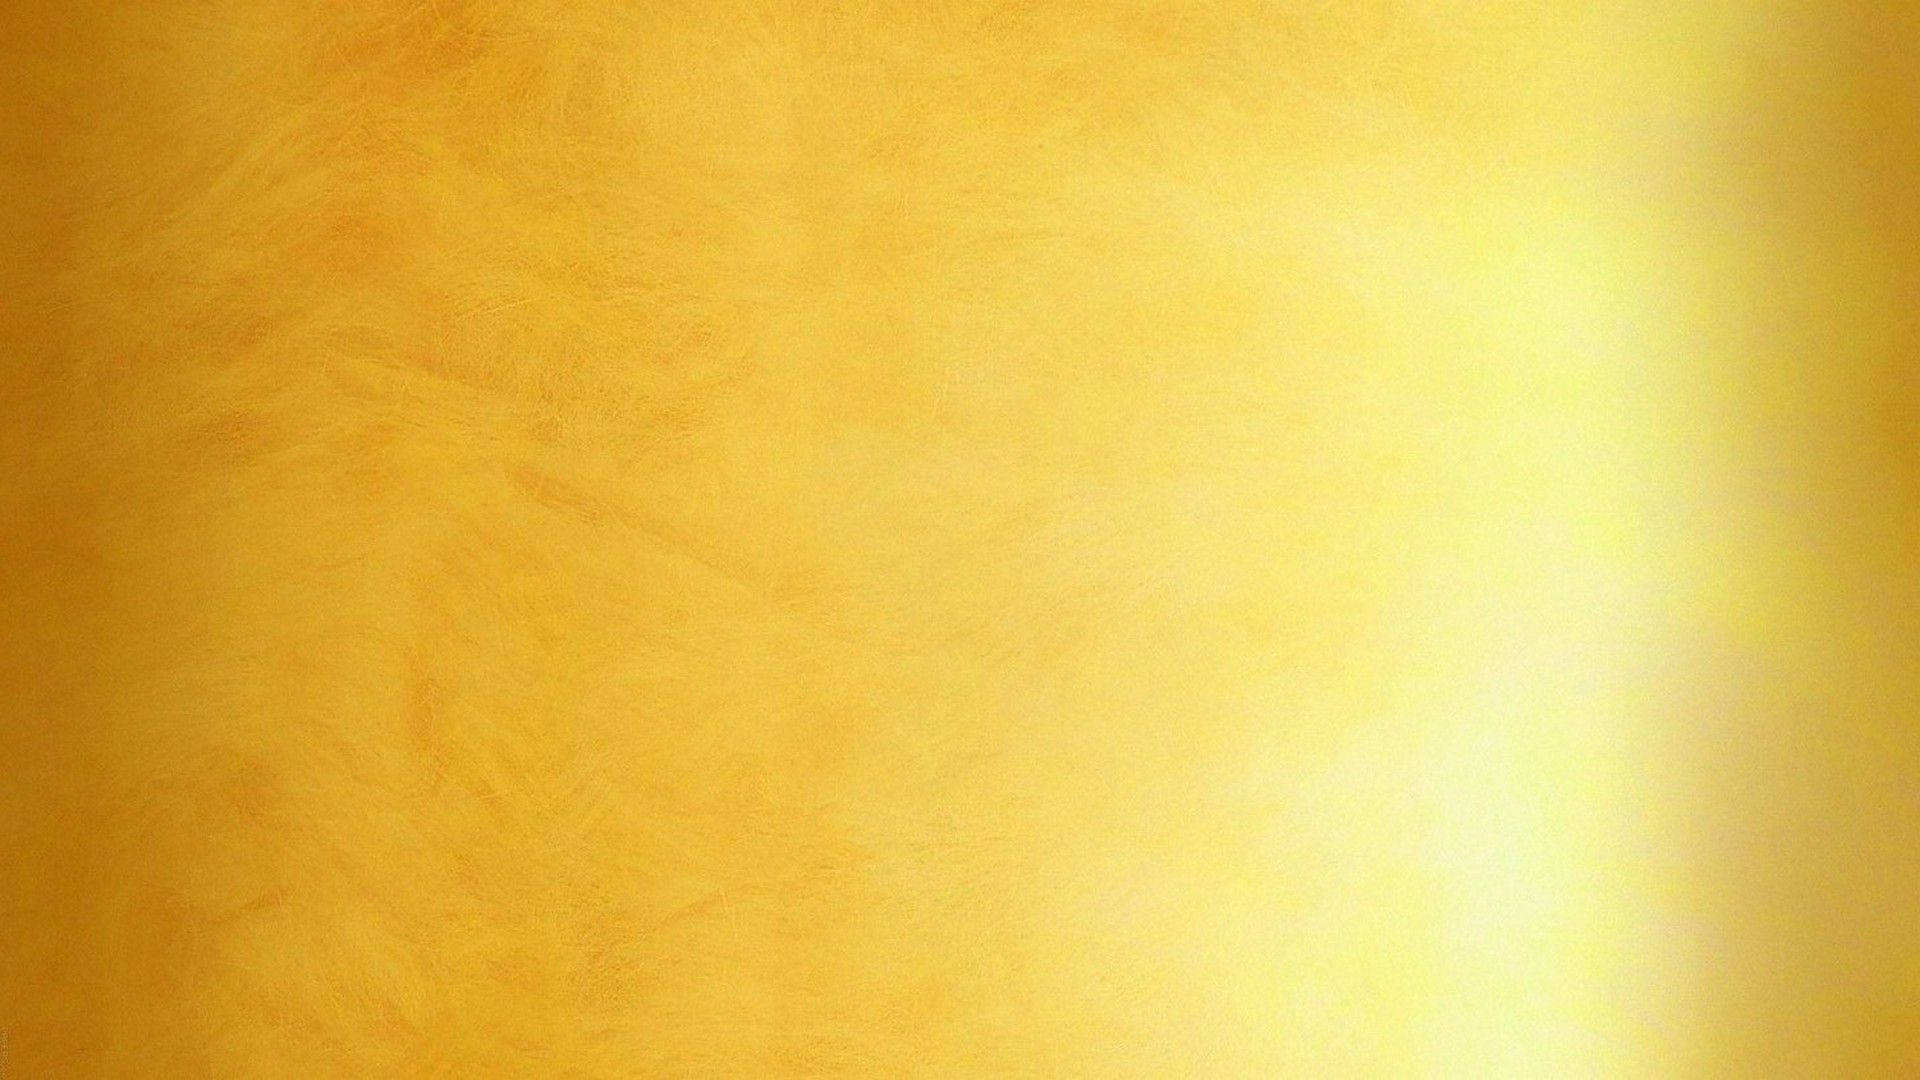 Free Plain Gold Wallpaper Downloads, [100+] Plain Gold Wallpapers for FREE  